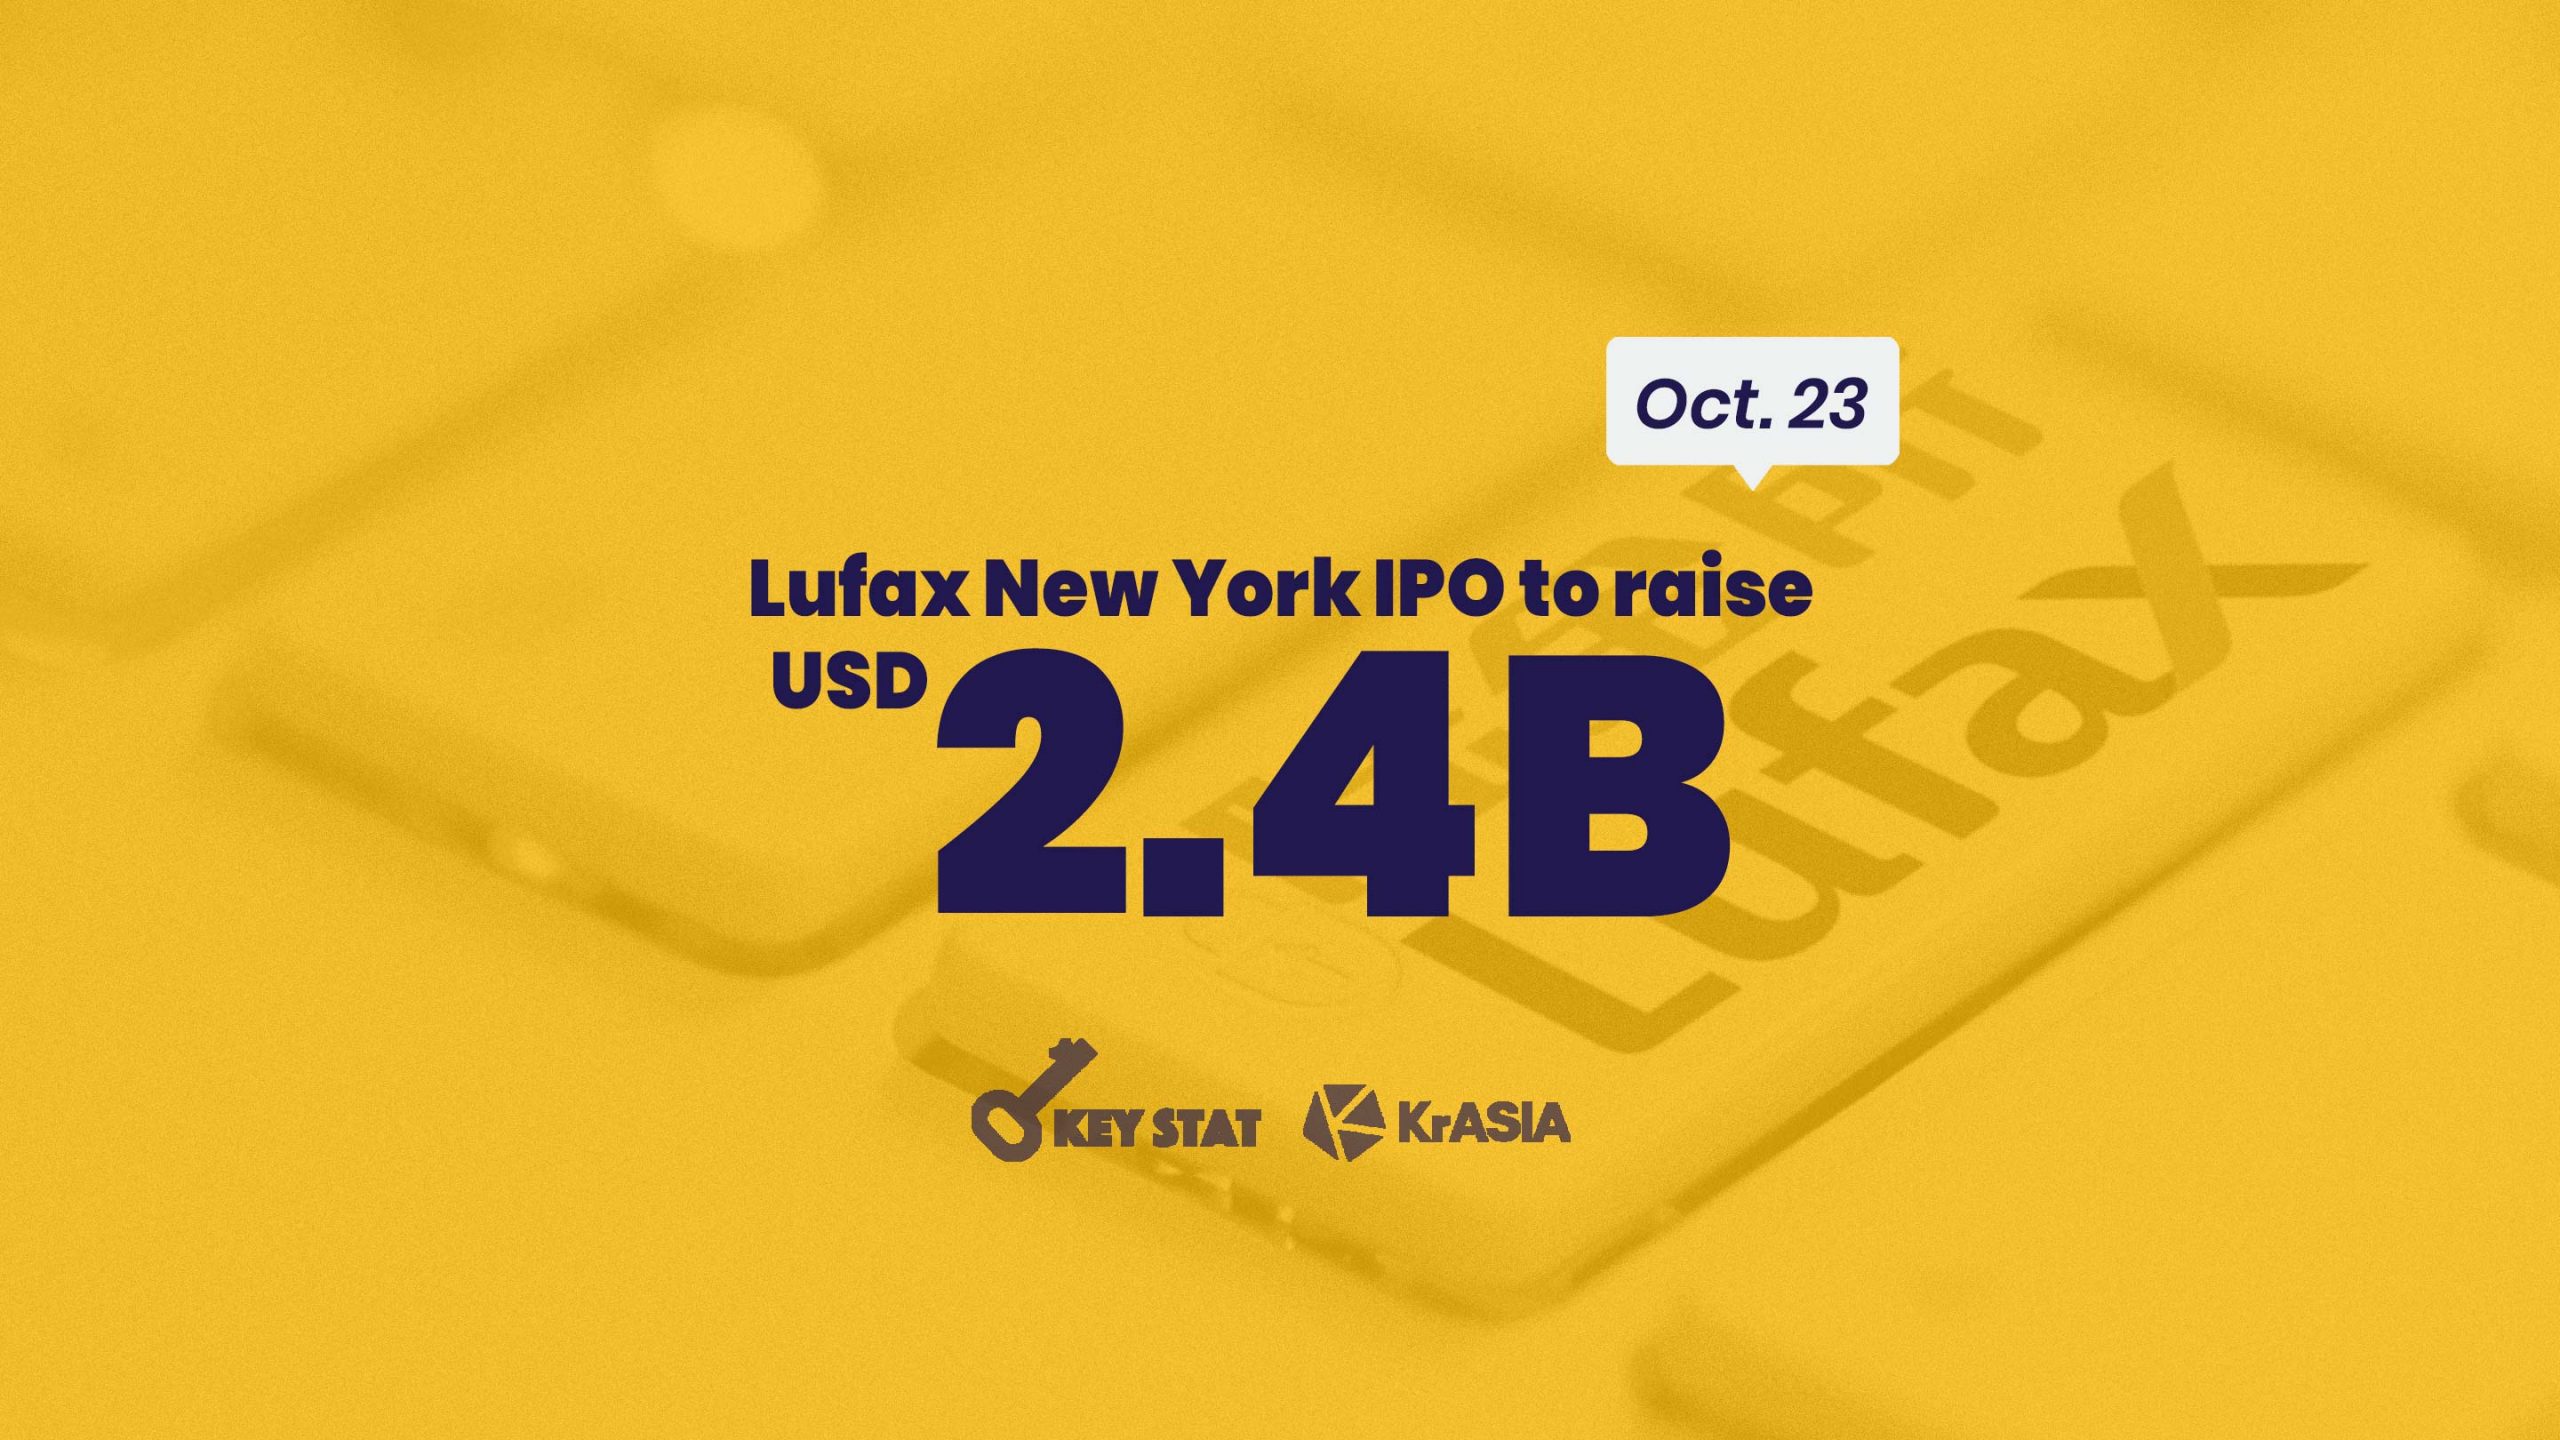 KEY STAT | Chinese fintech unicorn Lufax to collect USD 2.36 billion in New York IPO